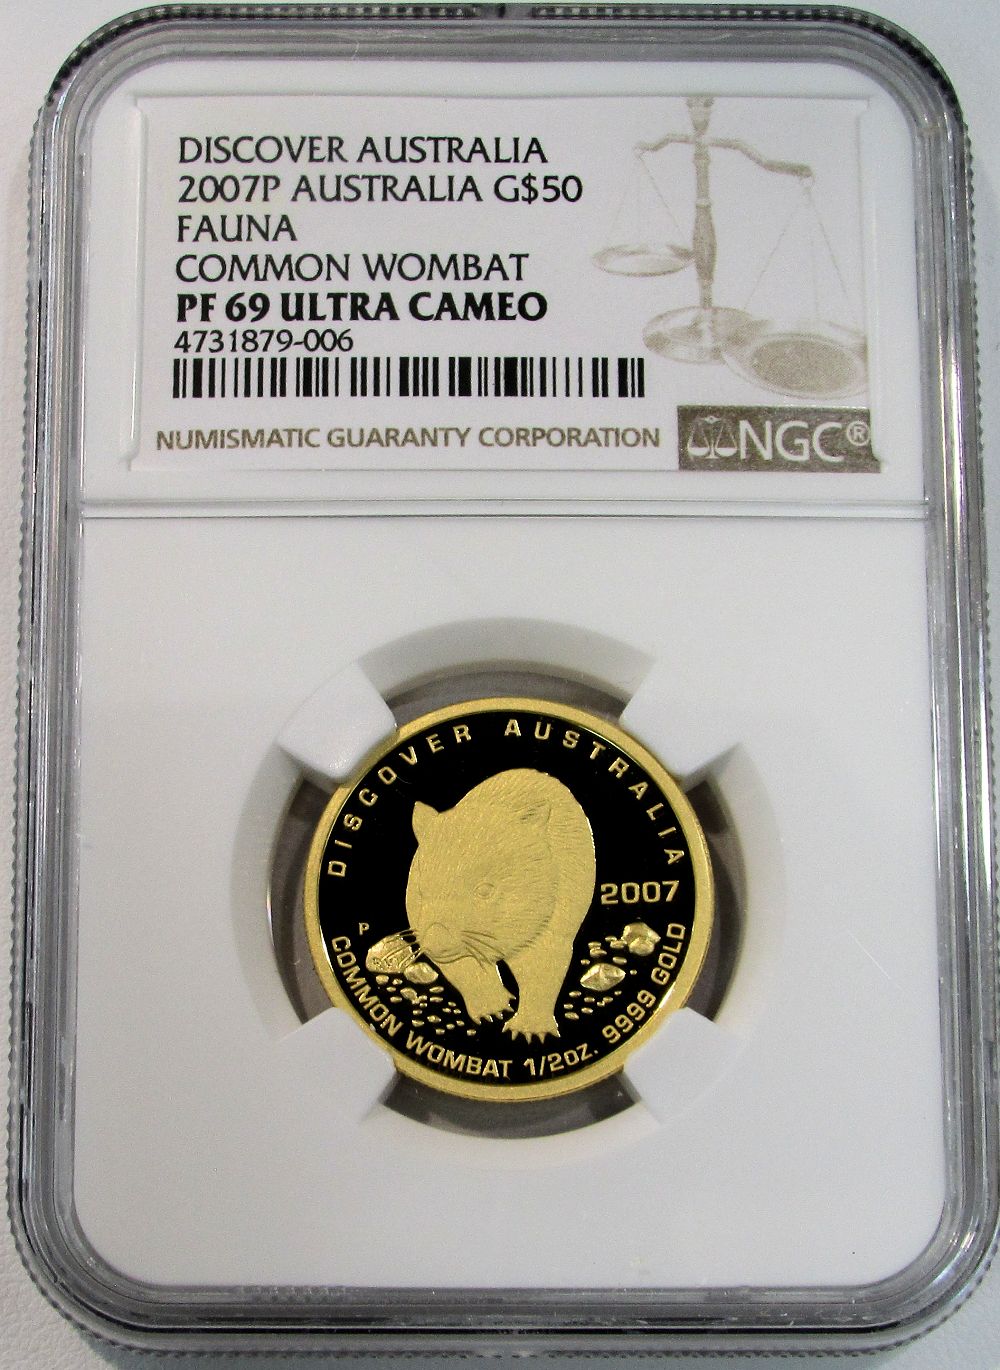 2007 P GOLD AUSTRALIA $50 COIN NGC PROOF 69 ULTRA CAMEO FAUNA SERIES COMMON WOMBAT ONLY 253 MINTED